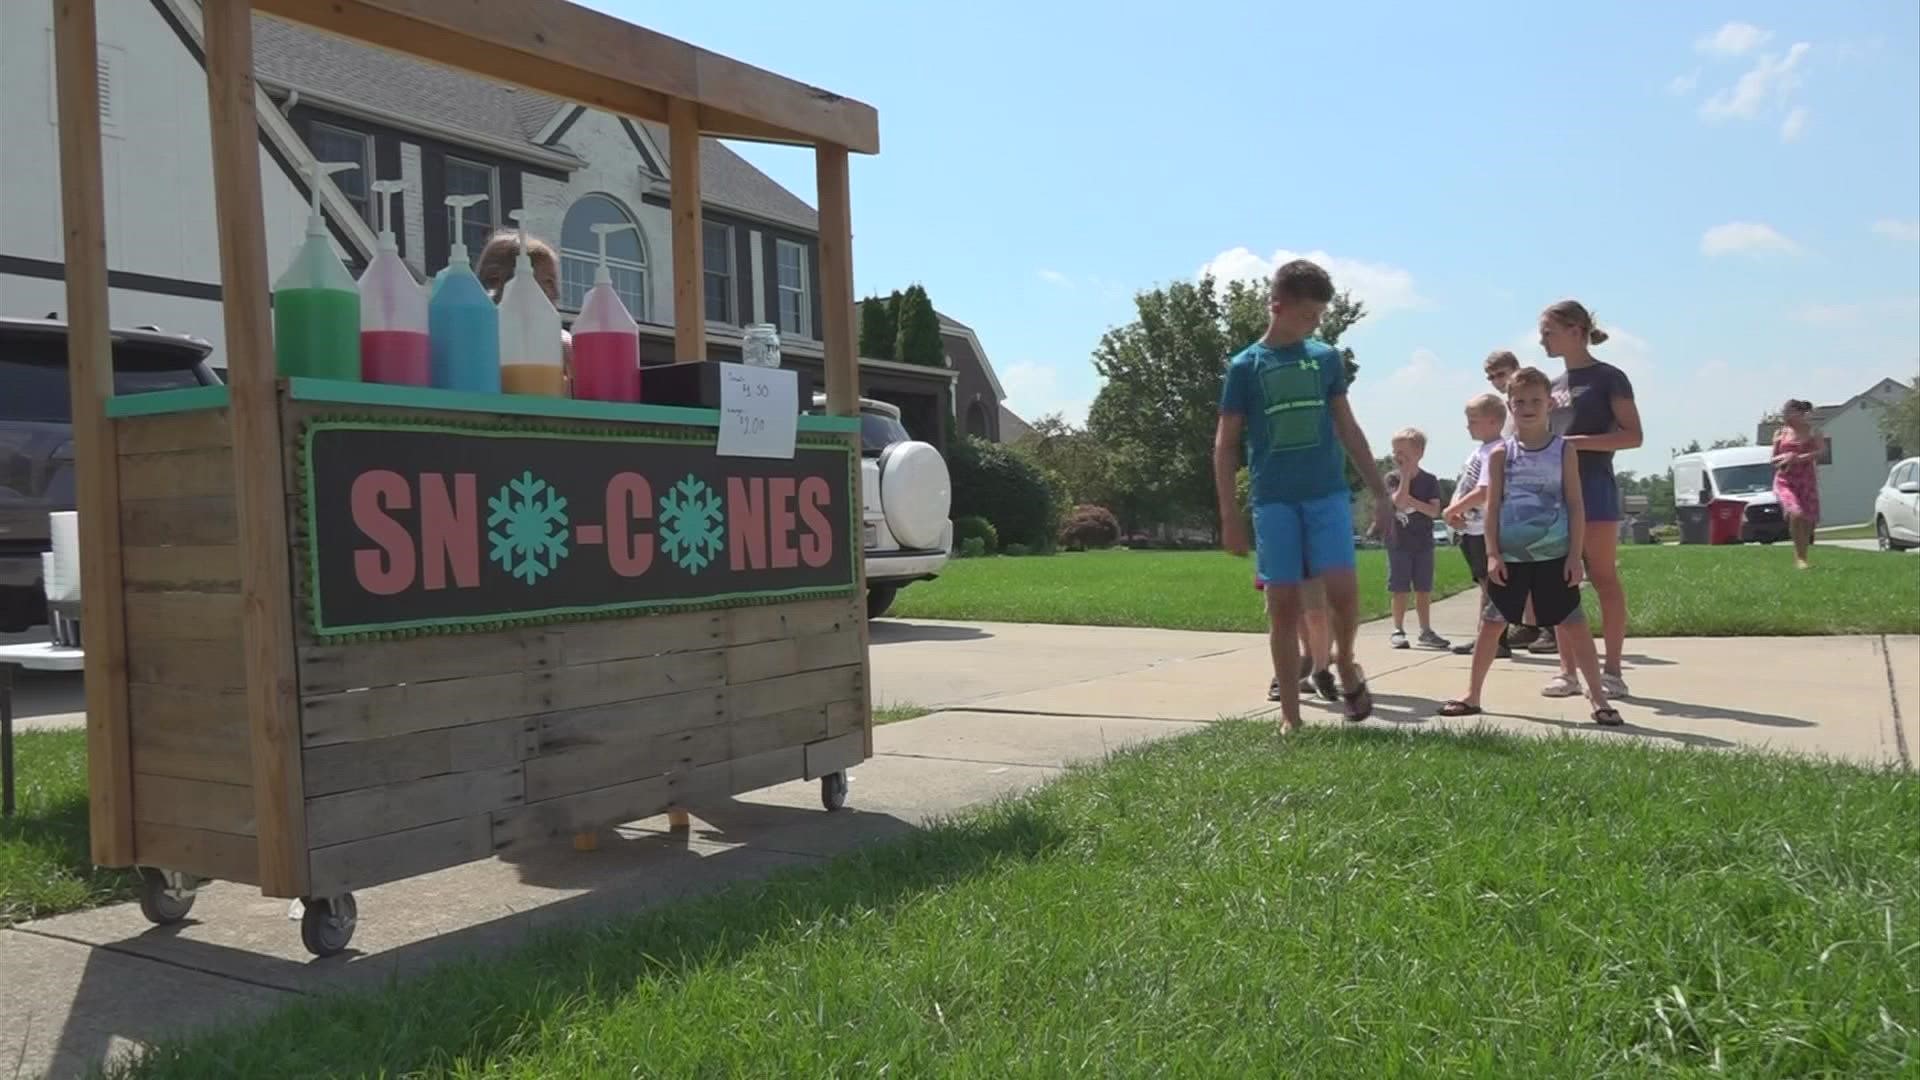 Kayla Farrant runs the Sno Cones business on Ashley Creek Drive. It’s an endeavor that started seven years ago with her brother, Isaac.